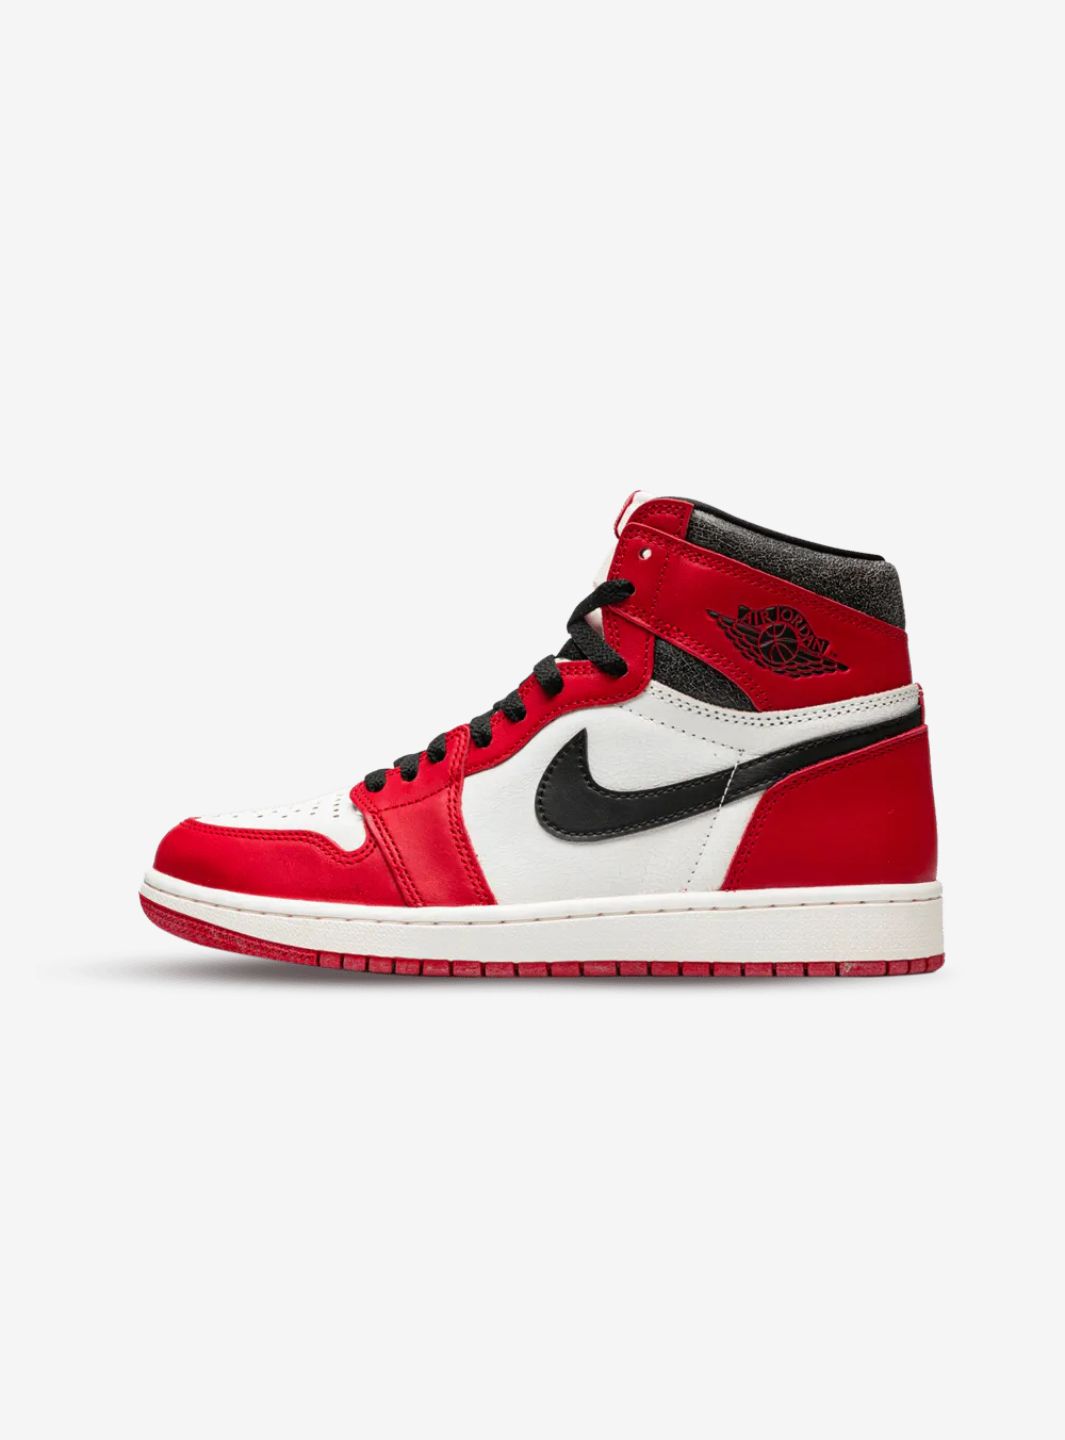 Air Jordan 1 High Chicago Lost And Found (Reimagined) | ResellZone